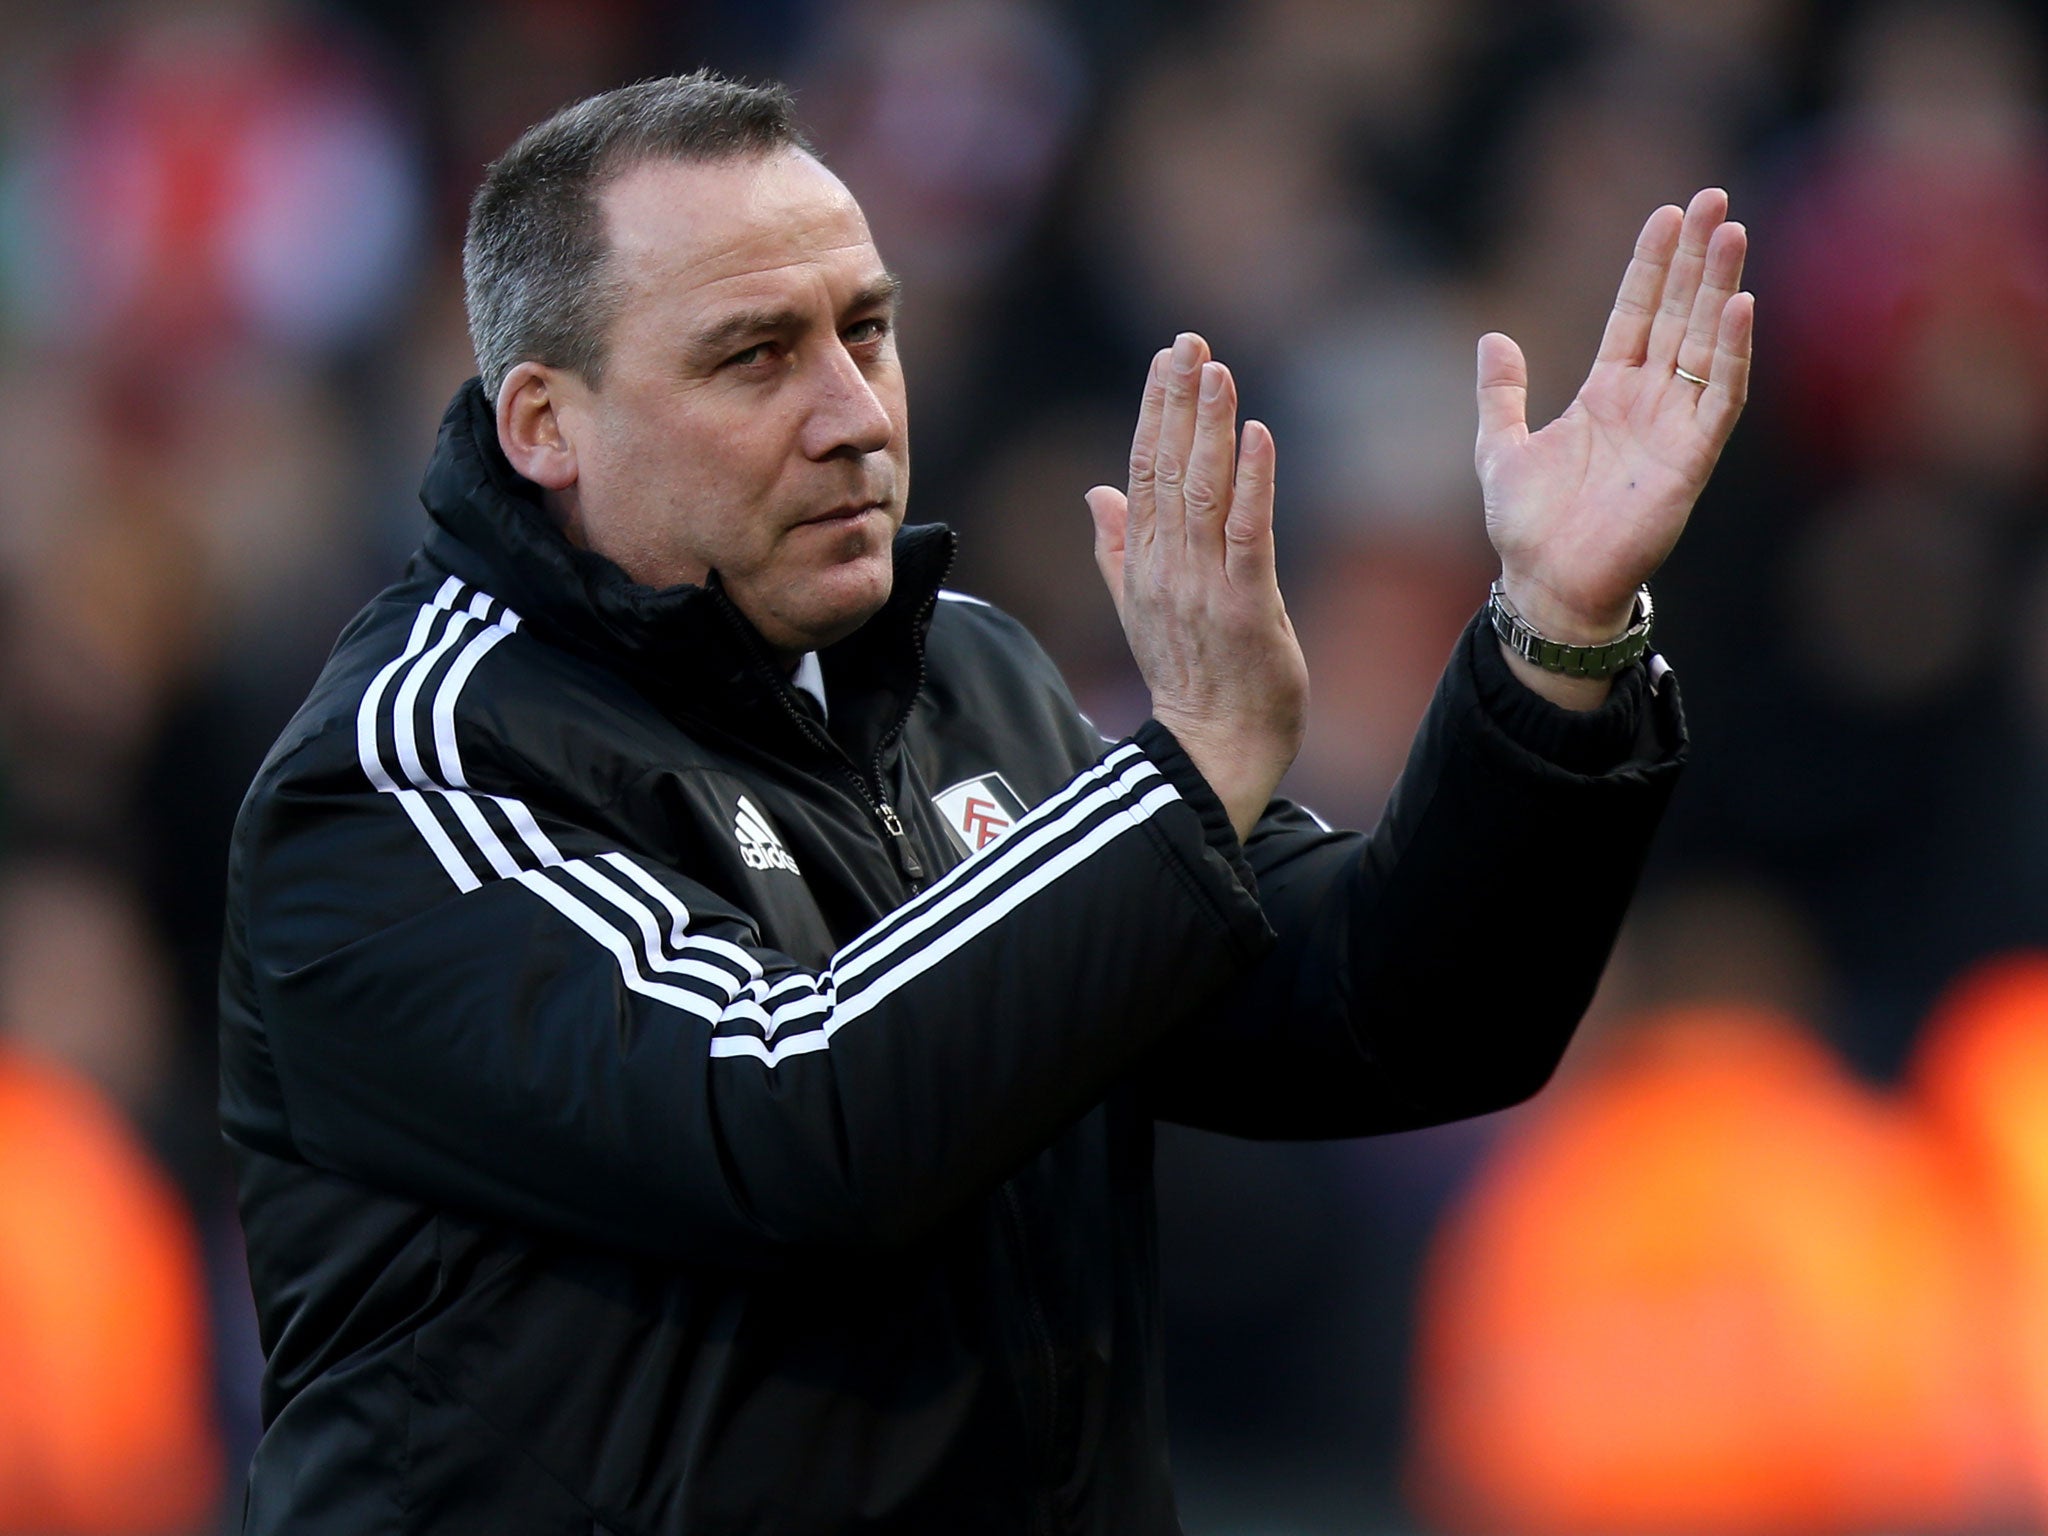 Rene Meulensteen's last job was a brief spell in charge at Fulham